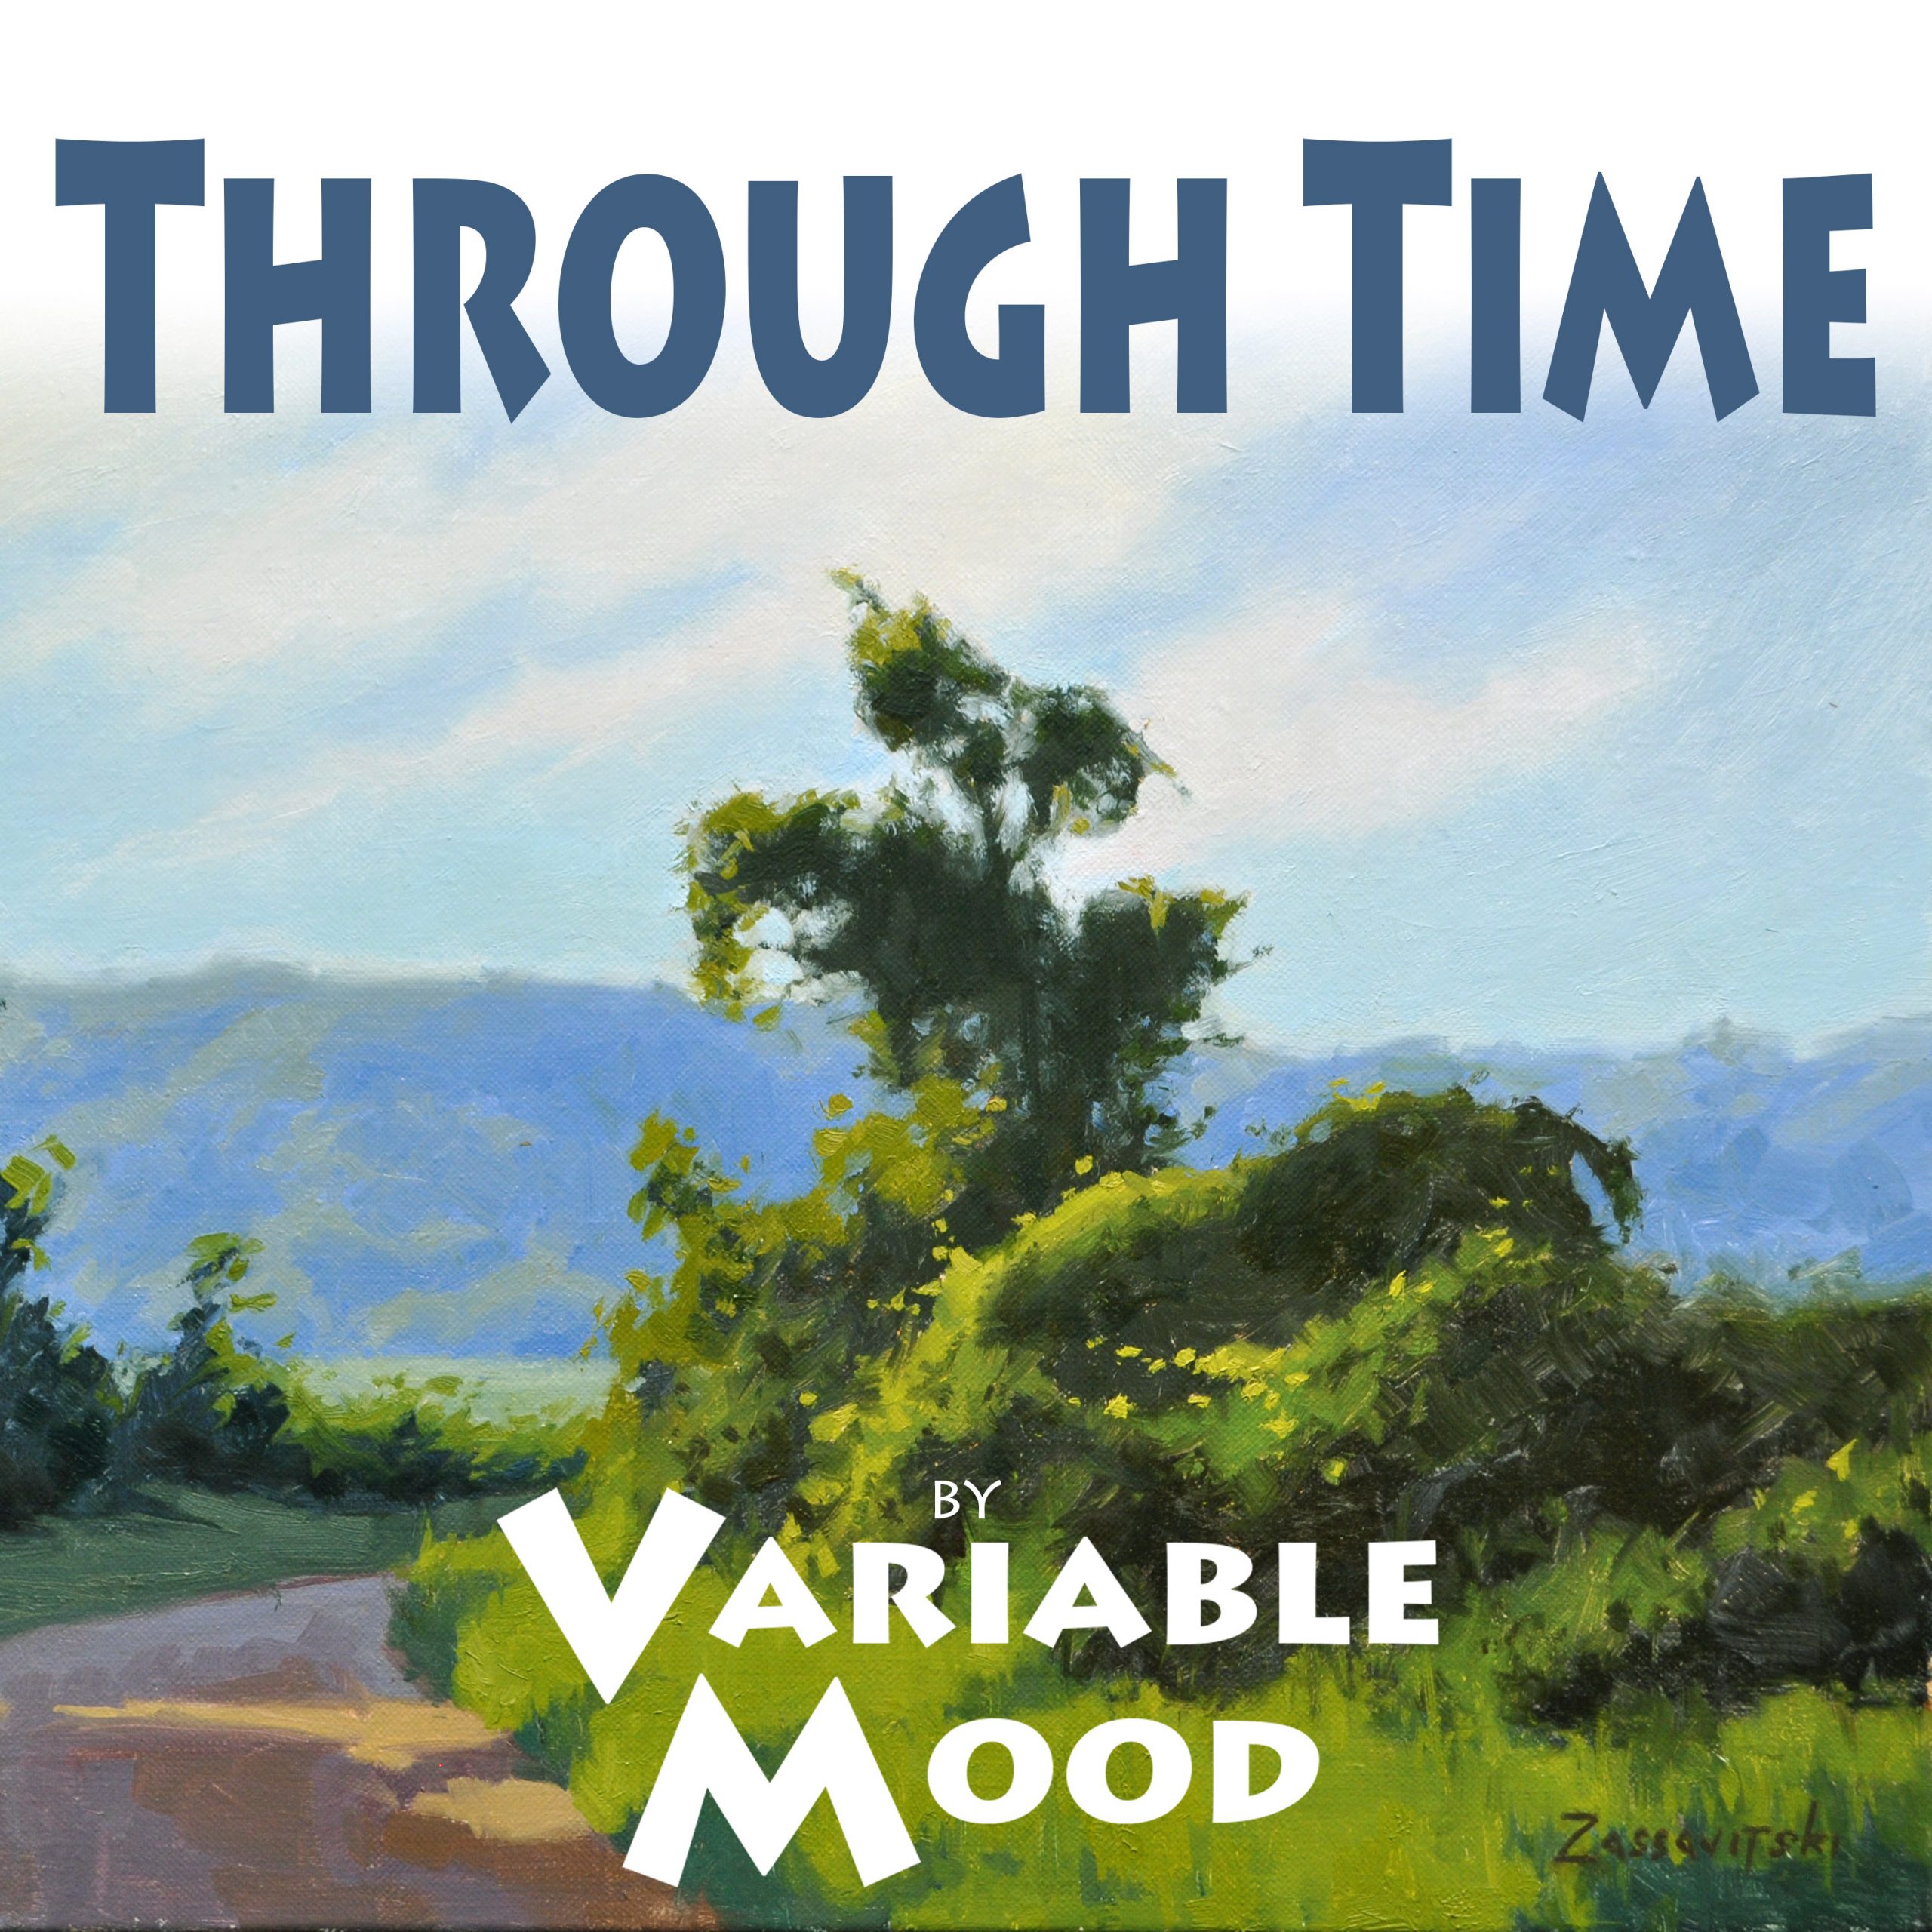 Interview: Premiere.One talk to  ‘Variable Mood’ as they release their new single ‘Through Time’.